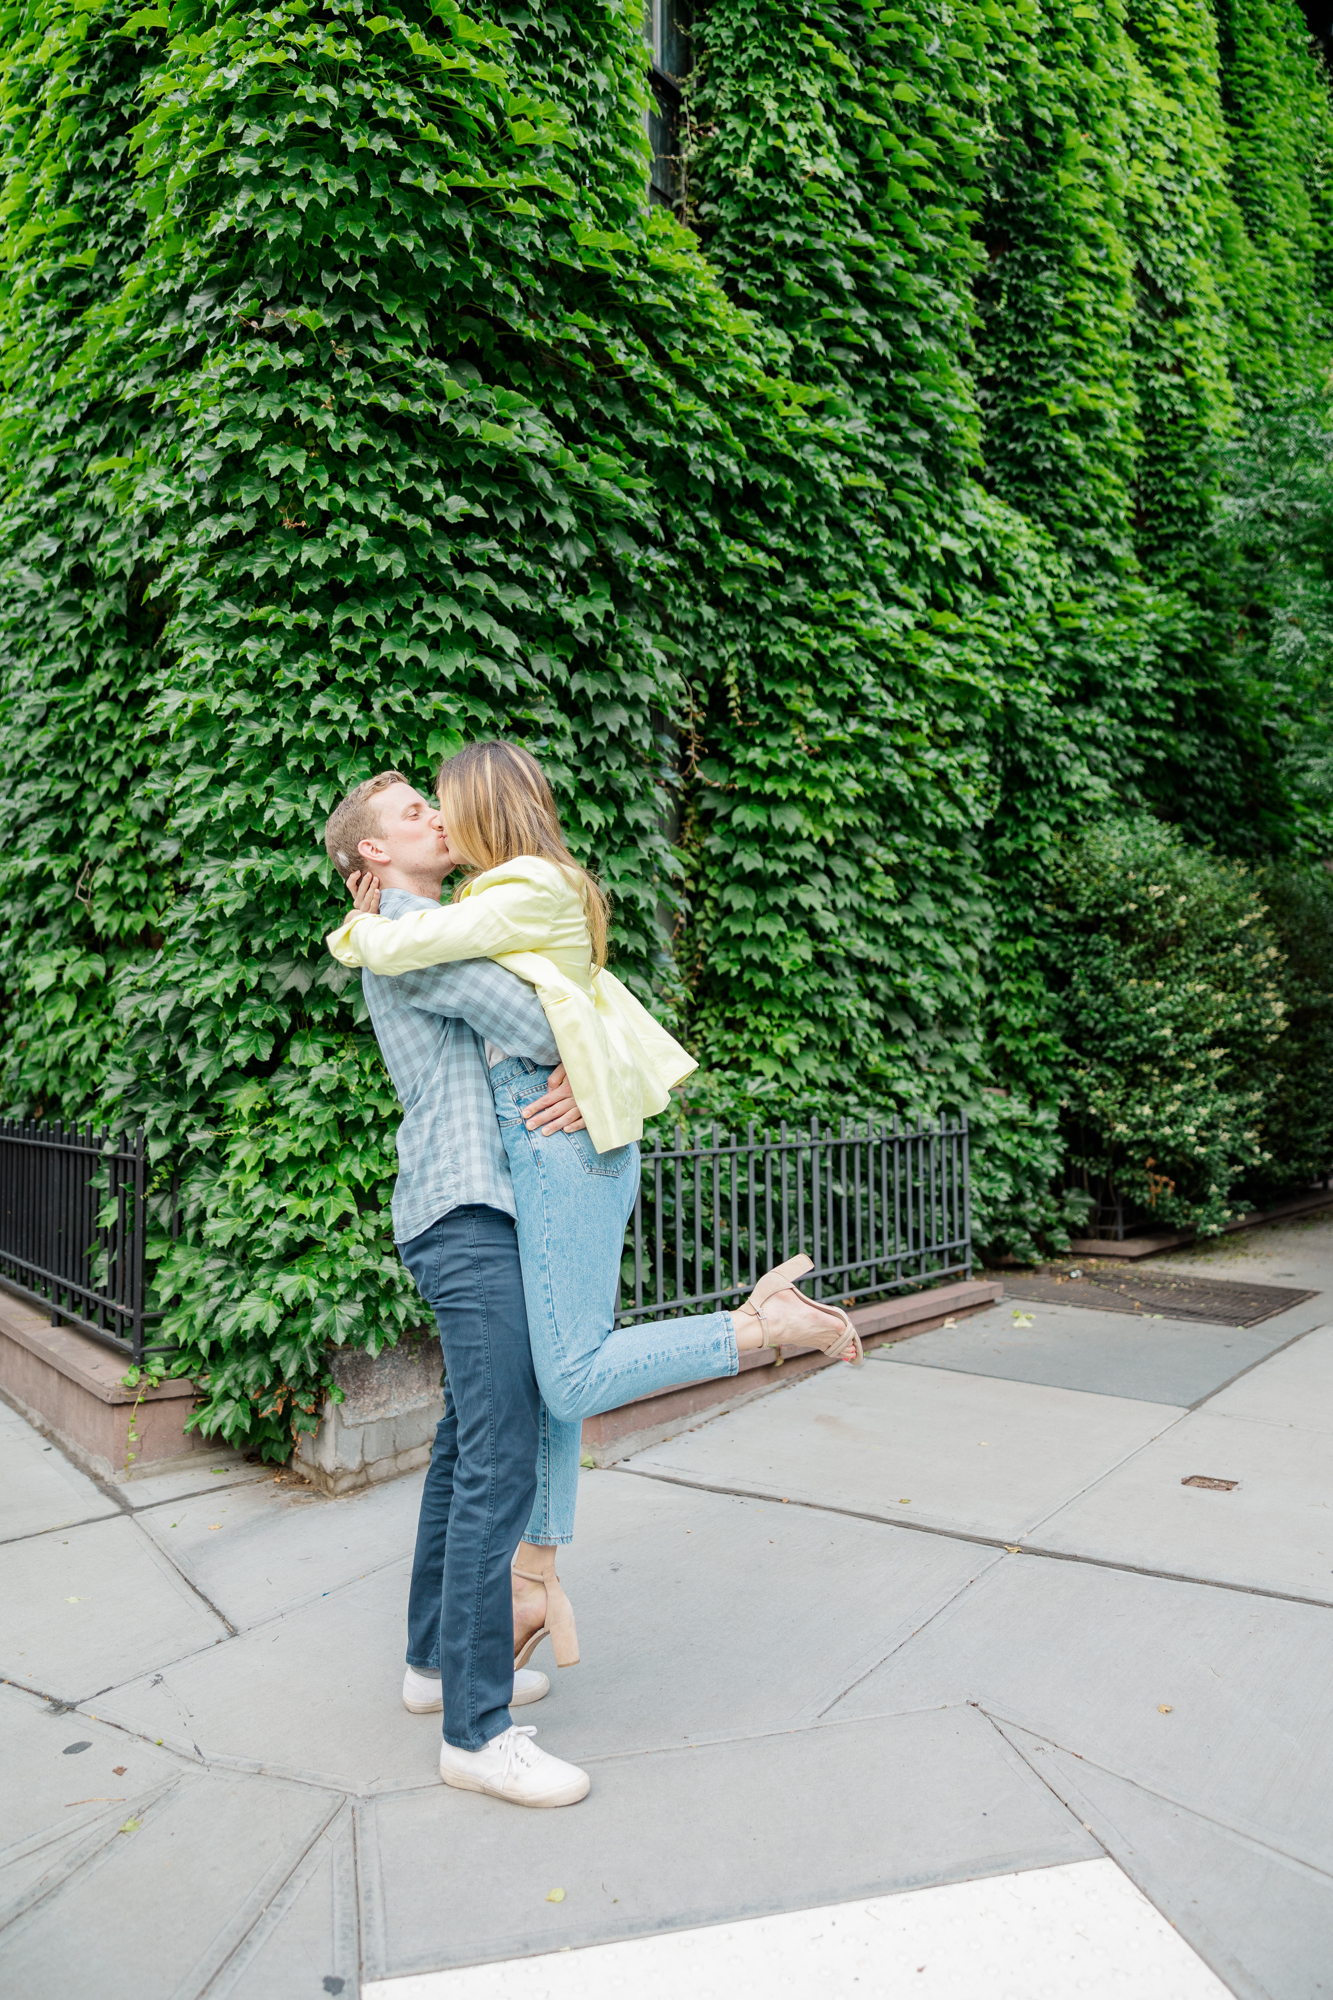 Intimate Summer Engagement Photography in the West Village